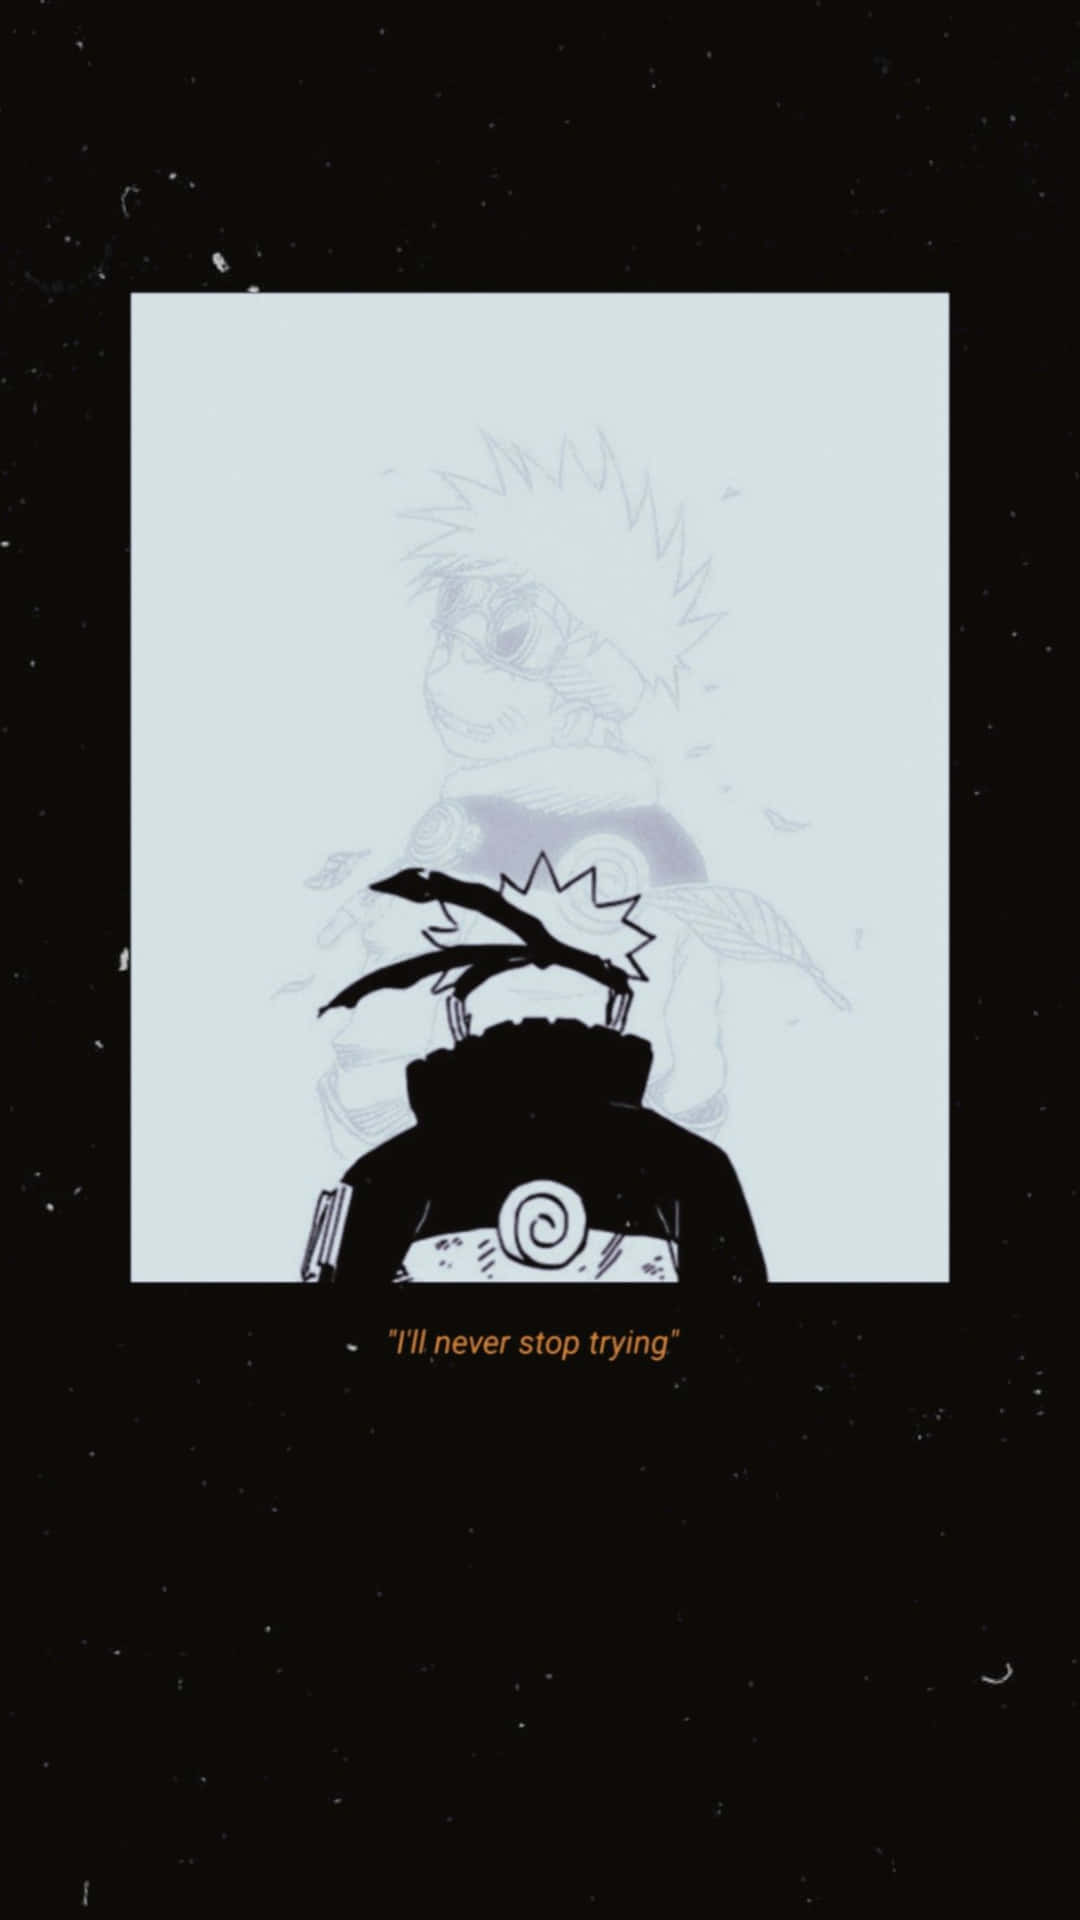 Aesthetic Naruto Wallpapers  Top 18 Best Aesthetic Naruto Wallpapers  HQ 